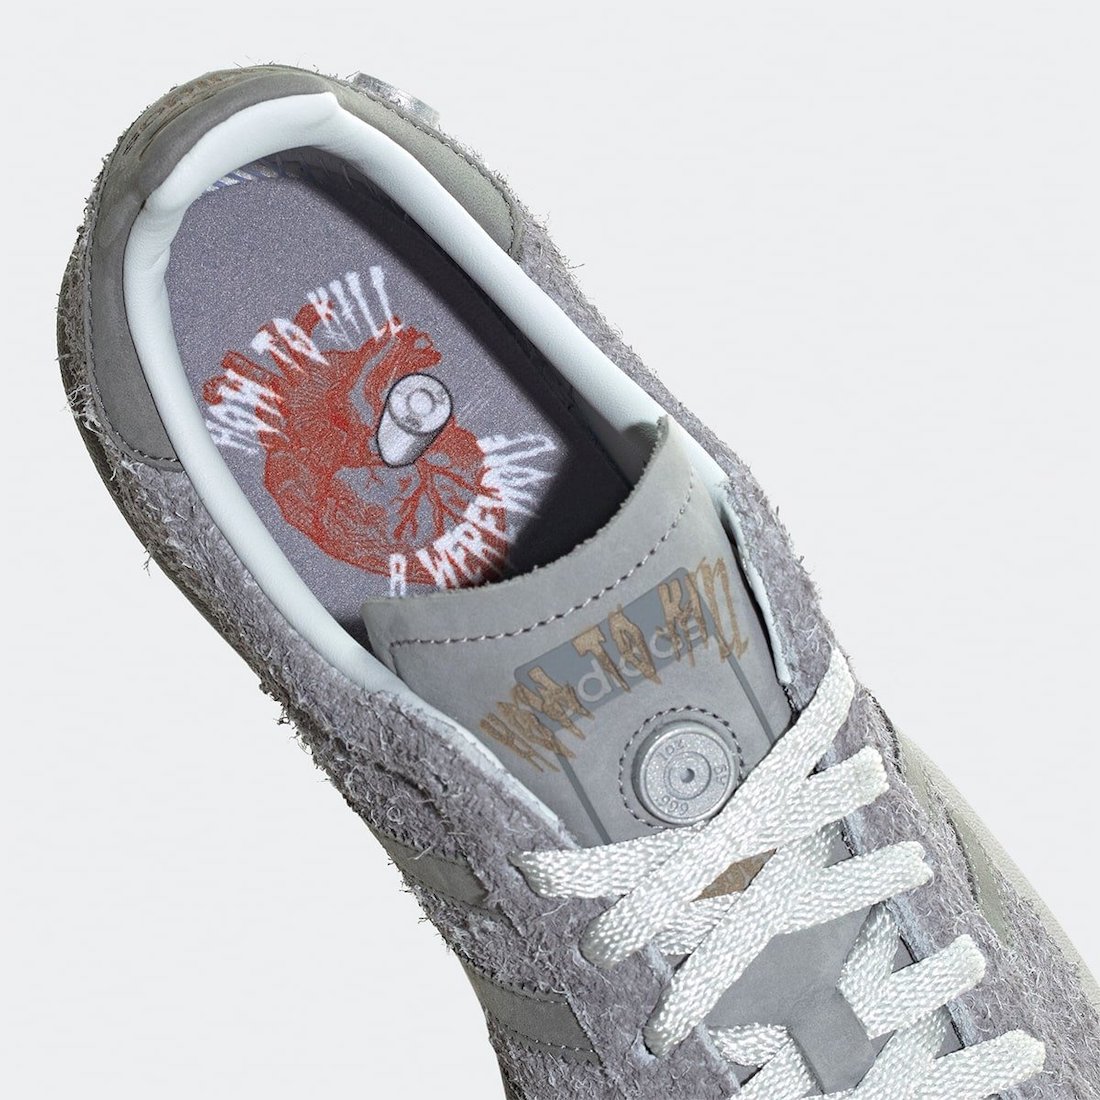 adidas Campus 80s How To Kill A Werewolf GX3951 Release Date